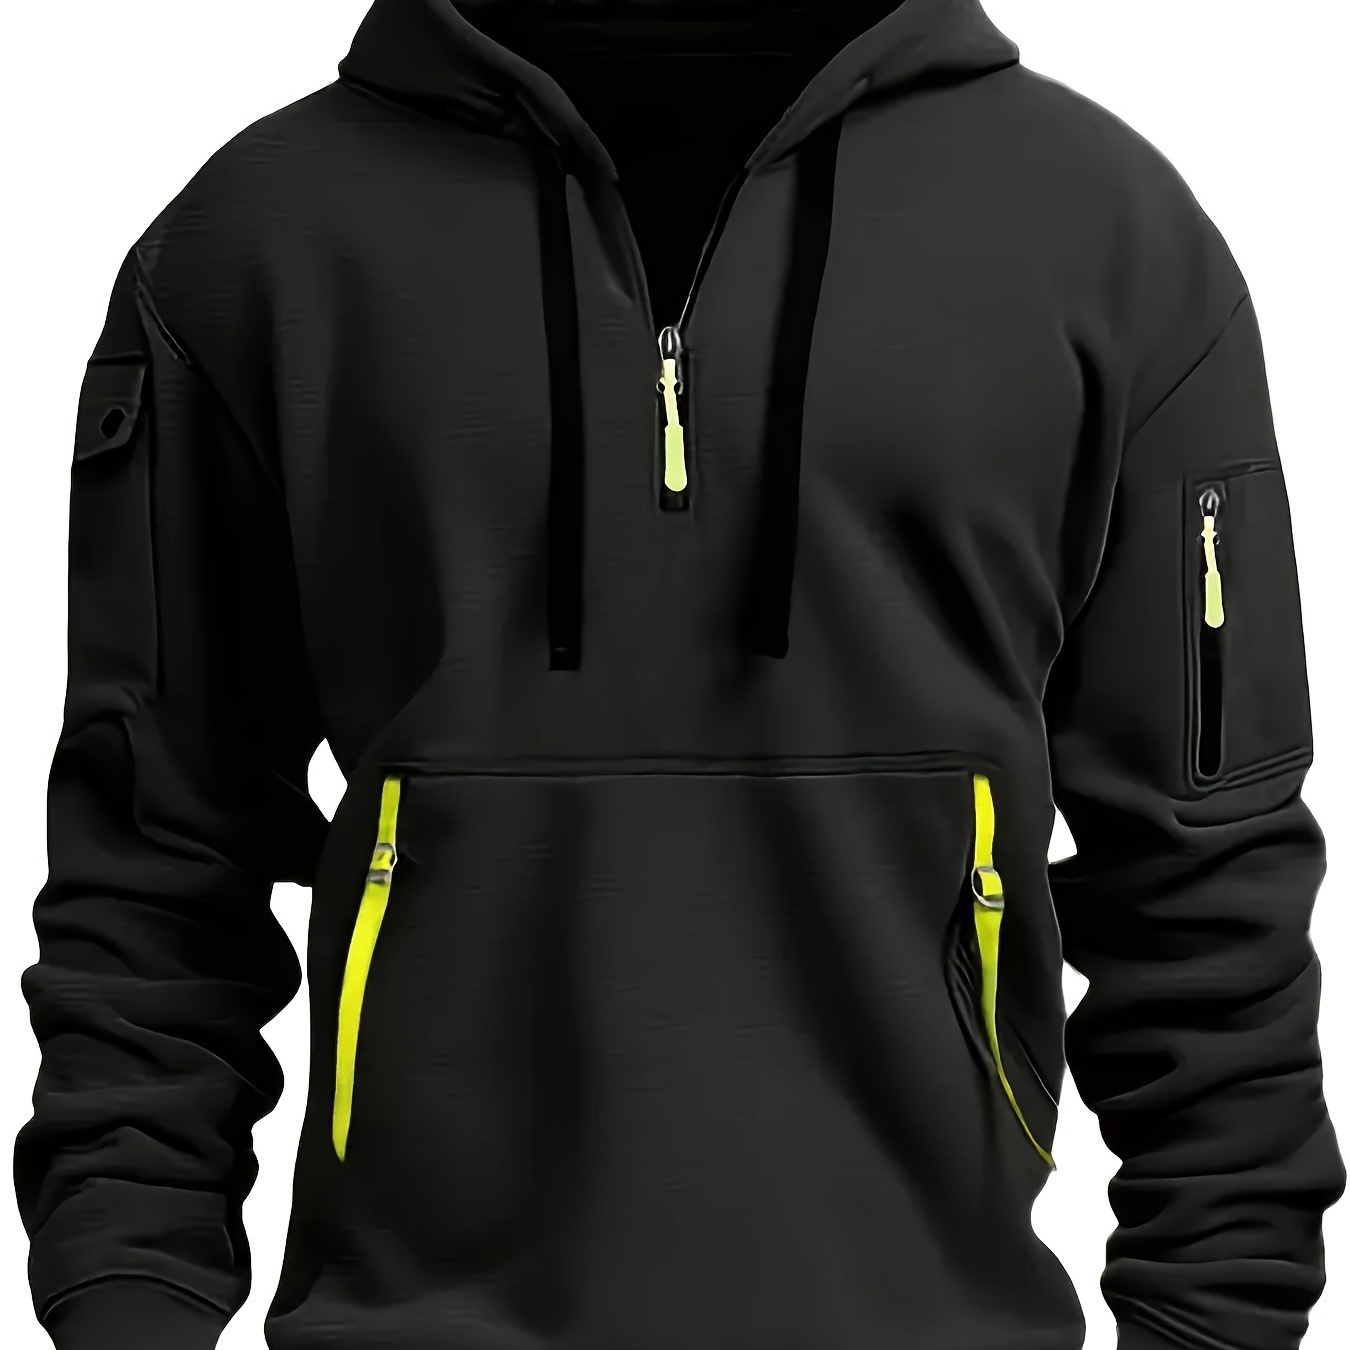 

Men's Solid Color Hooded Long Sleeve Sweatshirt With Zippered Henley Neck, A Kangaroo Pocket And Fluorescent Color Drawstrings, Chic And Stylish Tops For Spring And Autumn Sports And Outdoors Wear